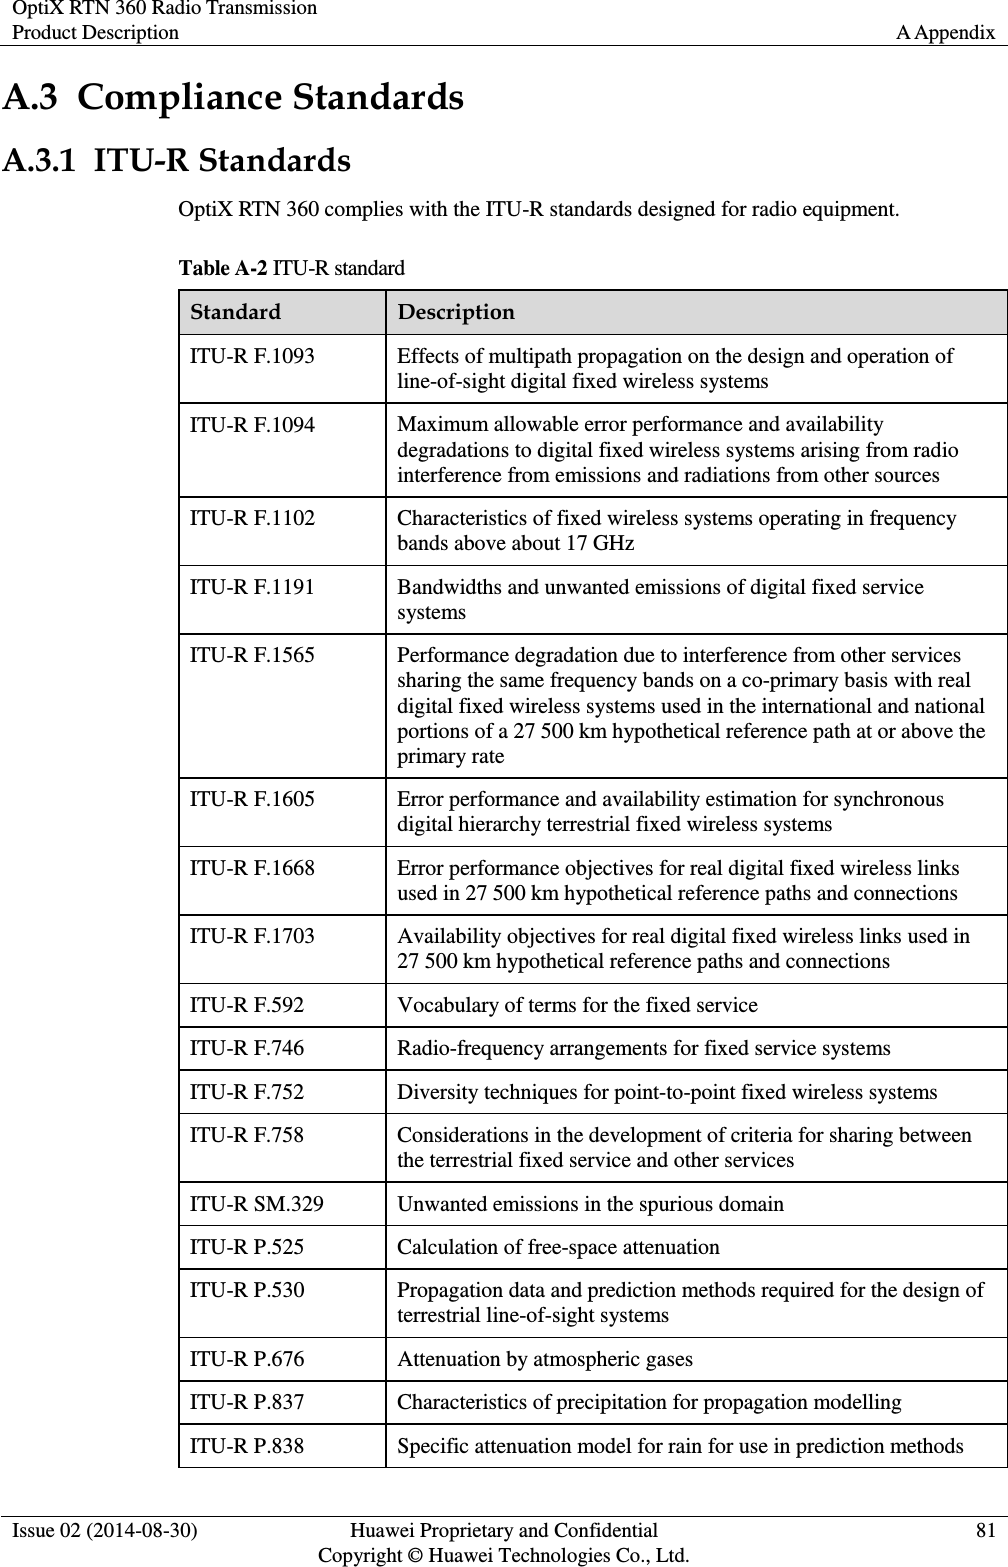 OptiX RTN 360 Radio Transmission Product Description A Appendix  Issue 02 (2014-08-30) Huawei Proprietary and Confidential                                     Copyright © Huawei Technologies Co., Ltd. 81  A.3  Compliance Standards A.3.1  ITU-R Standards OptiX RTN 360 complies with the ITU-R standards designed for radio equipment. Table A-2 ITU-R standard Standard Description ITU-R F.1093 Effects of multipath propagation on the design and operation of line-of-sight digital fixed wireless systems ITU-R F.1094 Maximum allowable error performance and availability degradations to digital fixed wireless systems arising from radio interference from emissions and radiations from other sources ITU-R F.1102 Characteristics of fixed wireless systems operating in frequency bands above about 17 GHz      ITU-R F.1191 Bandwidths and unwanted emissions of digital fixed service systems      ITU-R F.1565 Performance degradation due to interference from other services sharing the same frequency bands on a co-primary basis with real digital fixed wireless systems used in the international and national portions of a 27 500 km hypothetical reference path at or above the primary rate ITU-R F.1605 Error performance and availability estimation for synchronous digital hierarchy terrestrial fixed wireless systems      ITU-R F.1668 Error performance objectives for real digital fixed wireless links used in 27 500 km hypothetical reference paths and connections      ITU-R F.1703 Availability objectives for real digital fixed wireless links used in 27 500 km hypothetical reference paths and connections      ITU-R F.592 Vocabulary of terms for the fixed service ITU-R F.746 Radio-frequency arrangements for fixed service systems      ITU-R F.752 Diversity techniques for point-to-point fixed wireless systems      ITU-R F.758 Considerations in the development of criteria for sharing between the terrestrial fixed service and other services      ITU-R SM.329 Unwanted emissions in the spurious domain ITU-R P.525 Calculation of free-space attenuation ITU-R P.530 Propagation data and prediction methods required for the design of terrestrial line-of-sight systems ITU-R P.676 Attenuation by atmospheric gases ITU-R P.837 Characteristics of precipitation for propagation modelling ITU-R P.838 Specific attenuation model for rain for use in prediction methods 